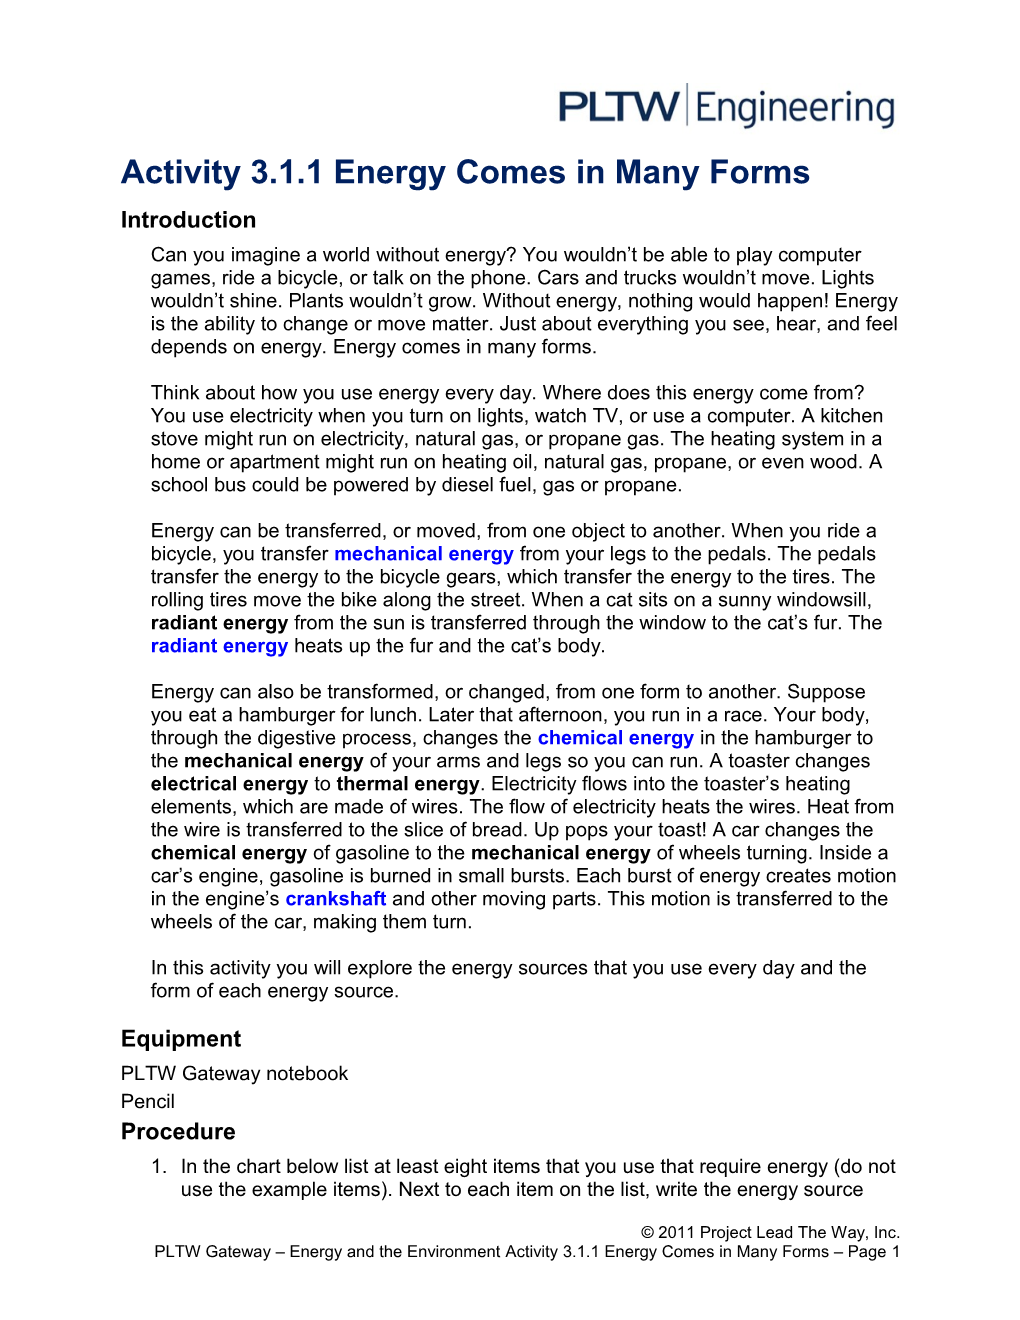 Activity 3.1.1 Energy Comes in Many Forms